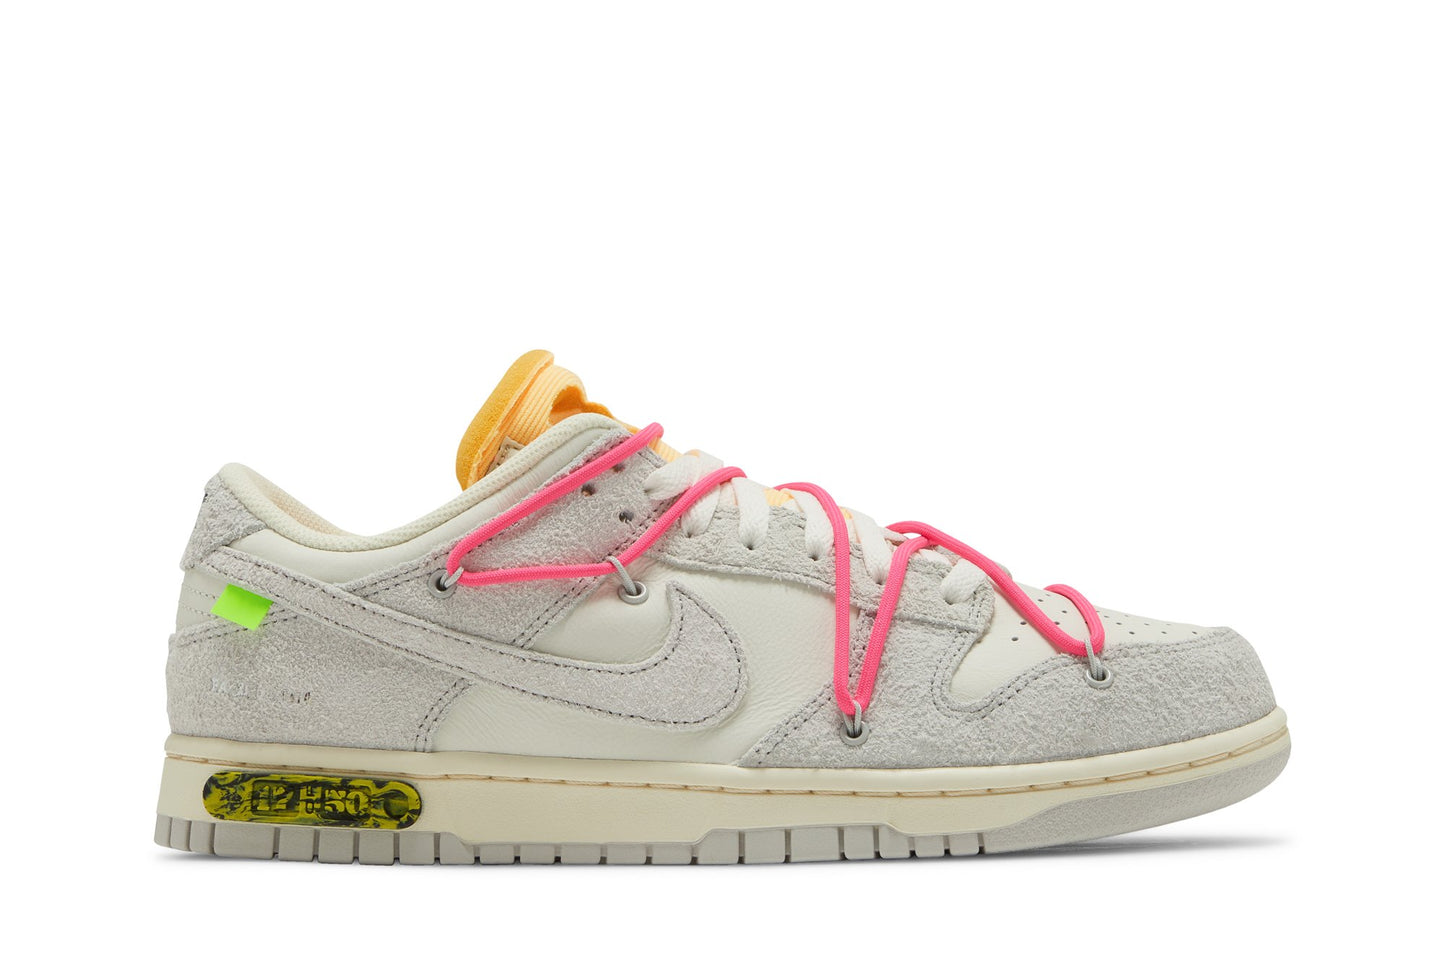 Off-White x Dunk Low 'Lot 17 of 50' DJ0950-117